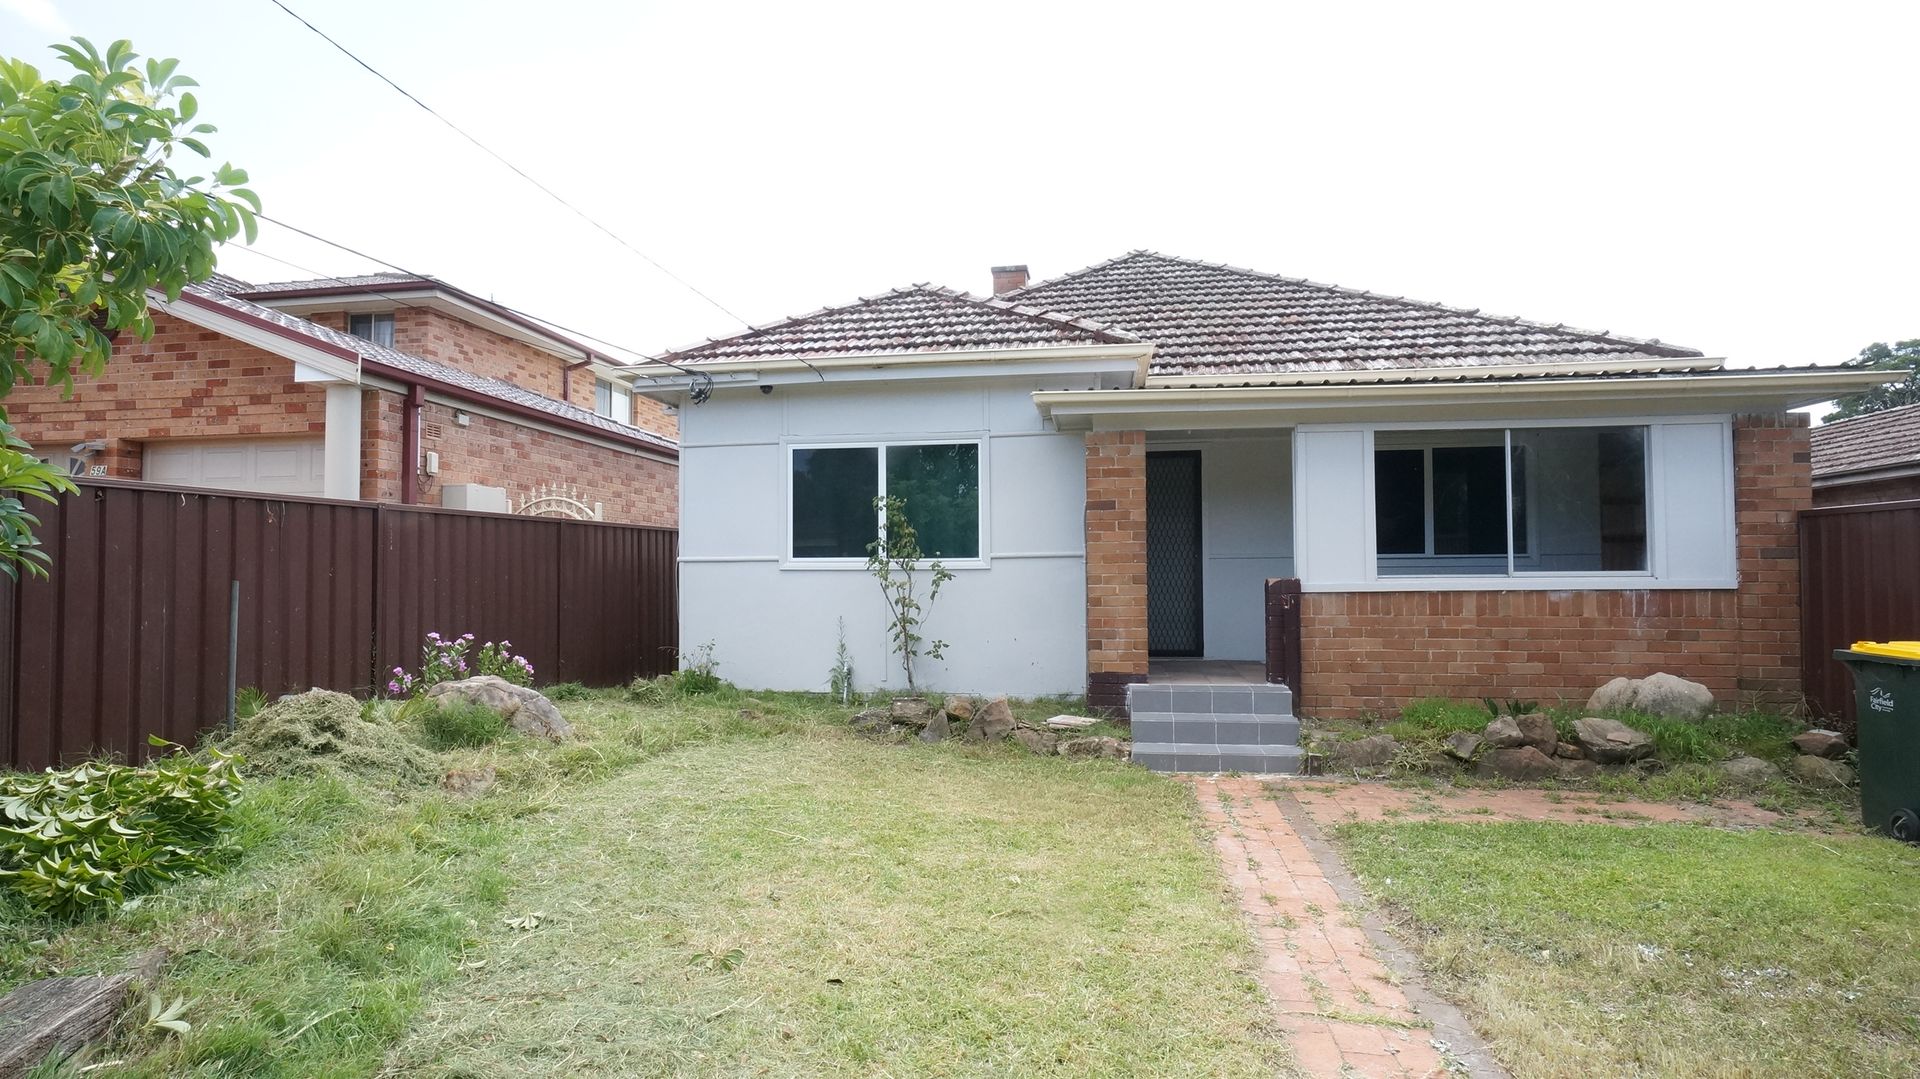 59 Fairview Road, Canley Vale NSW 2166